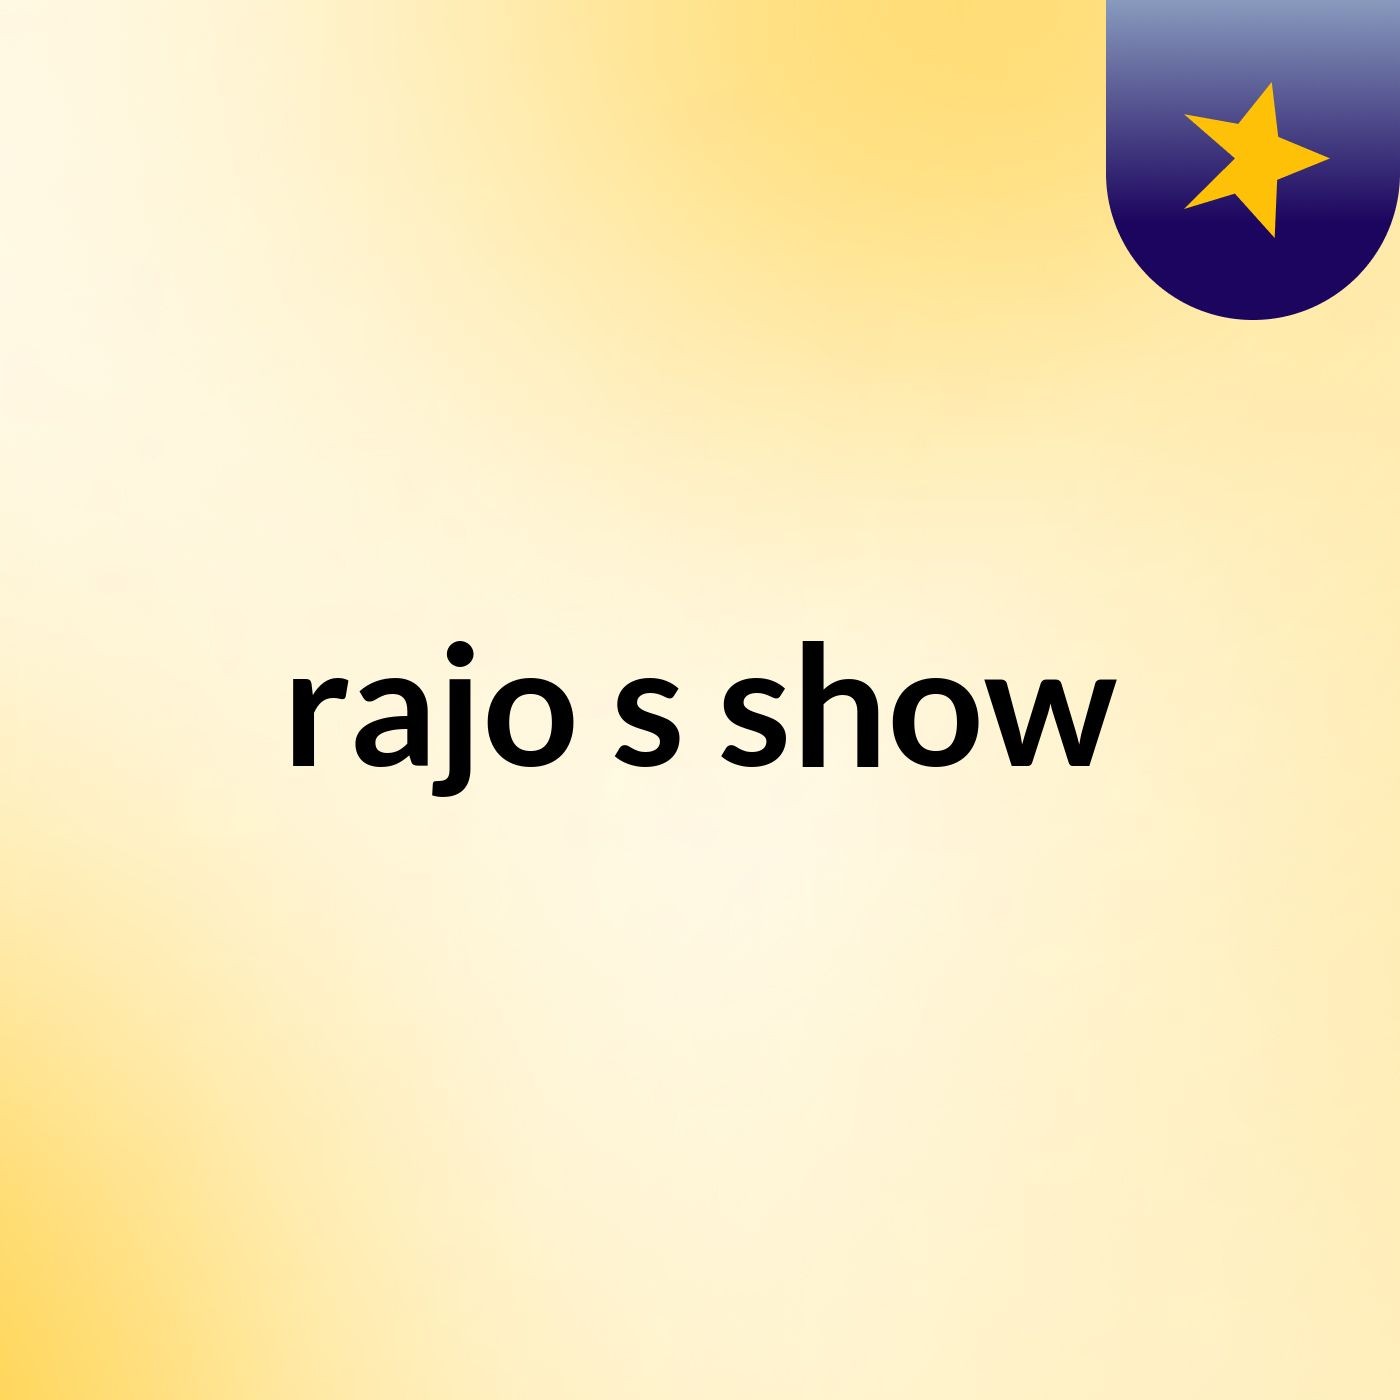 rajo's show